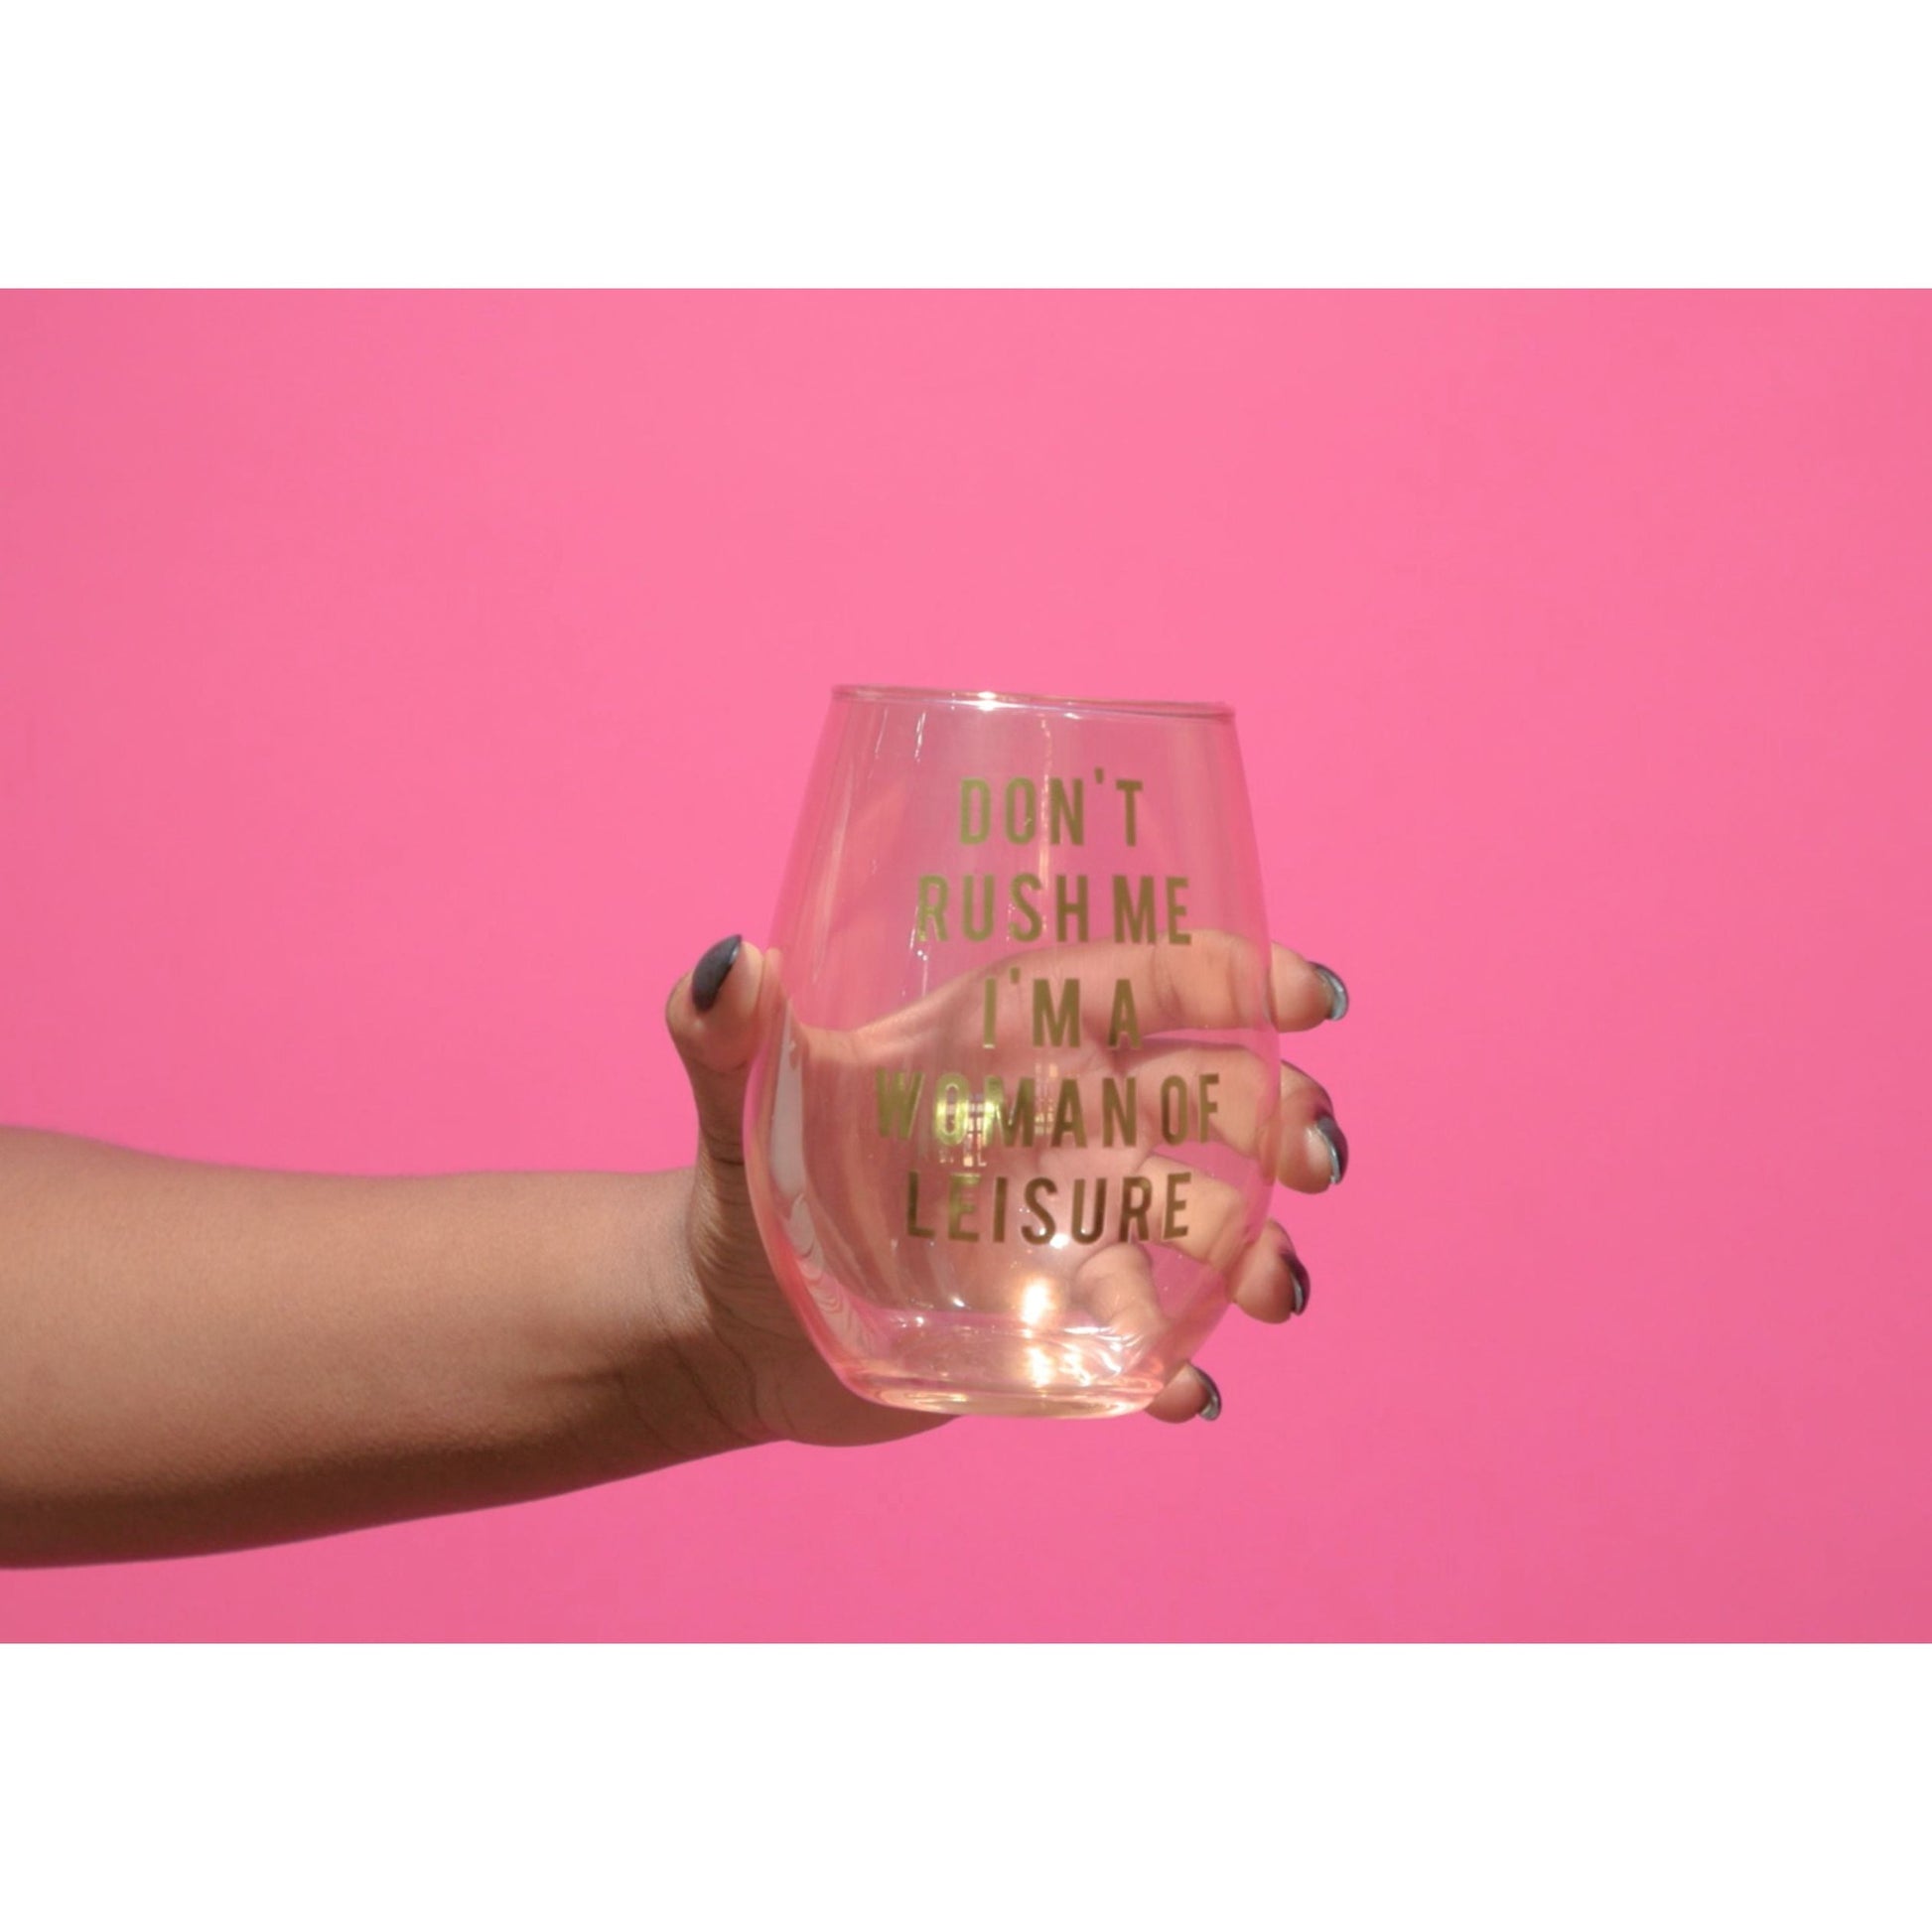 Don't Rush Me, I'm a Woman Of Leisure Stemless Wine Glass in Rose and Gold | 20 0z. | Set of 2